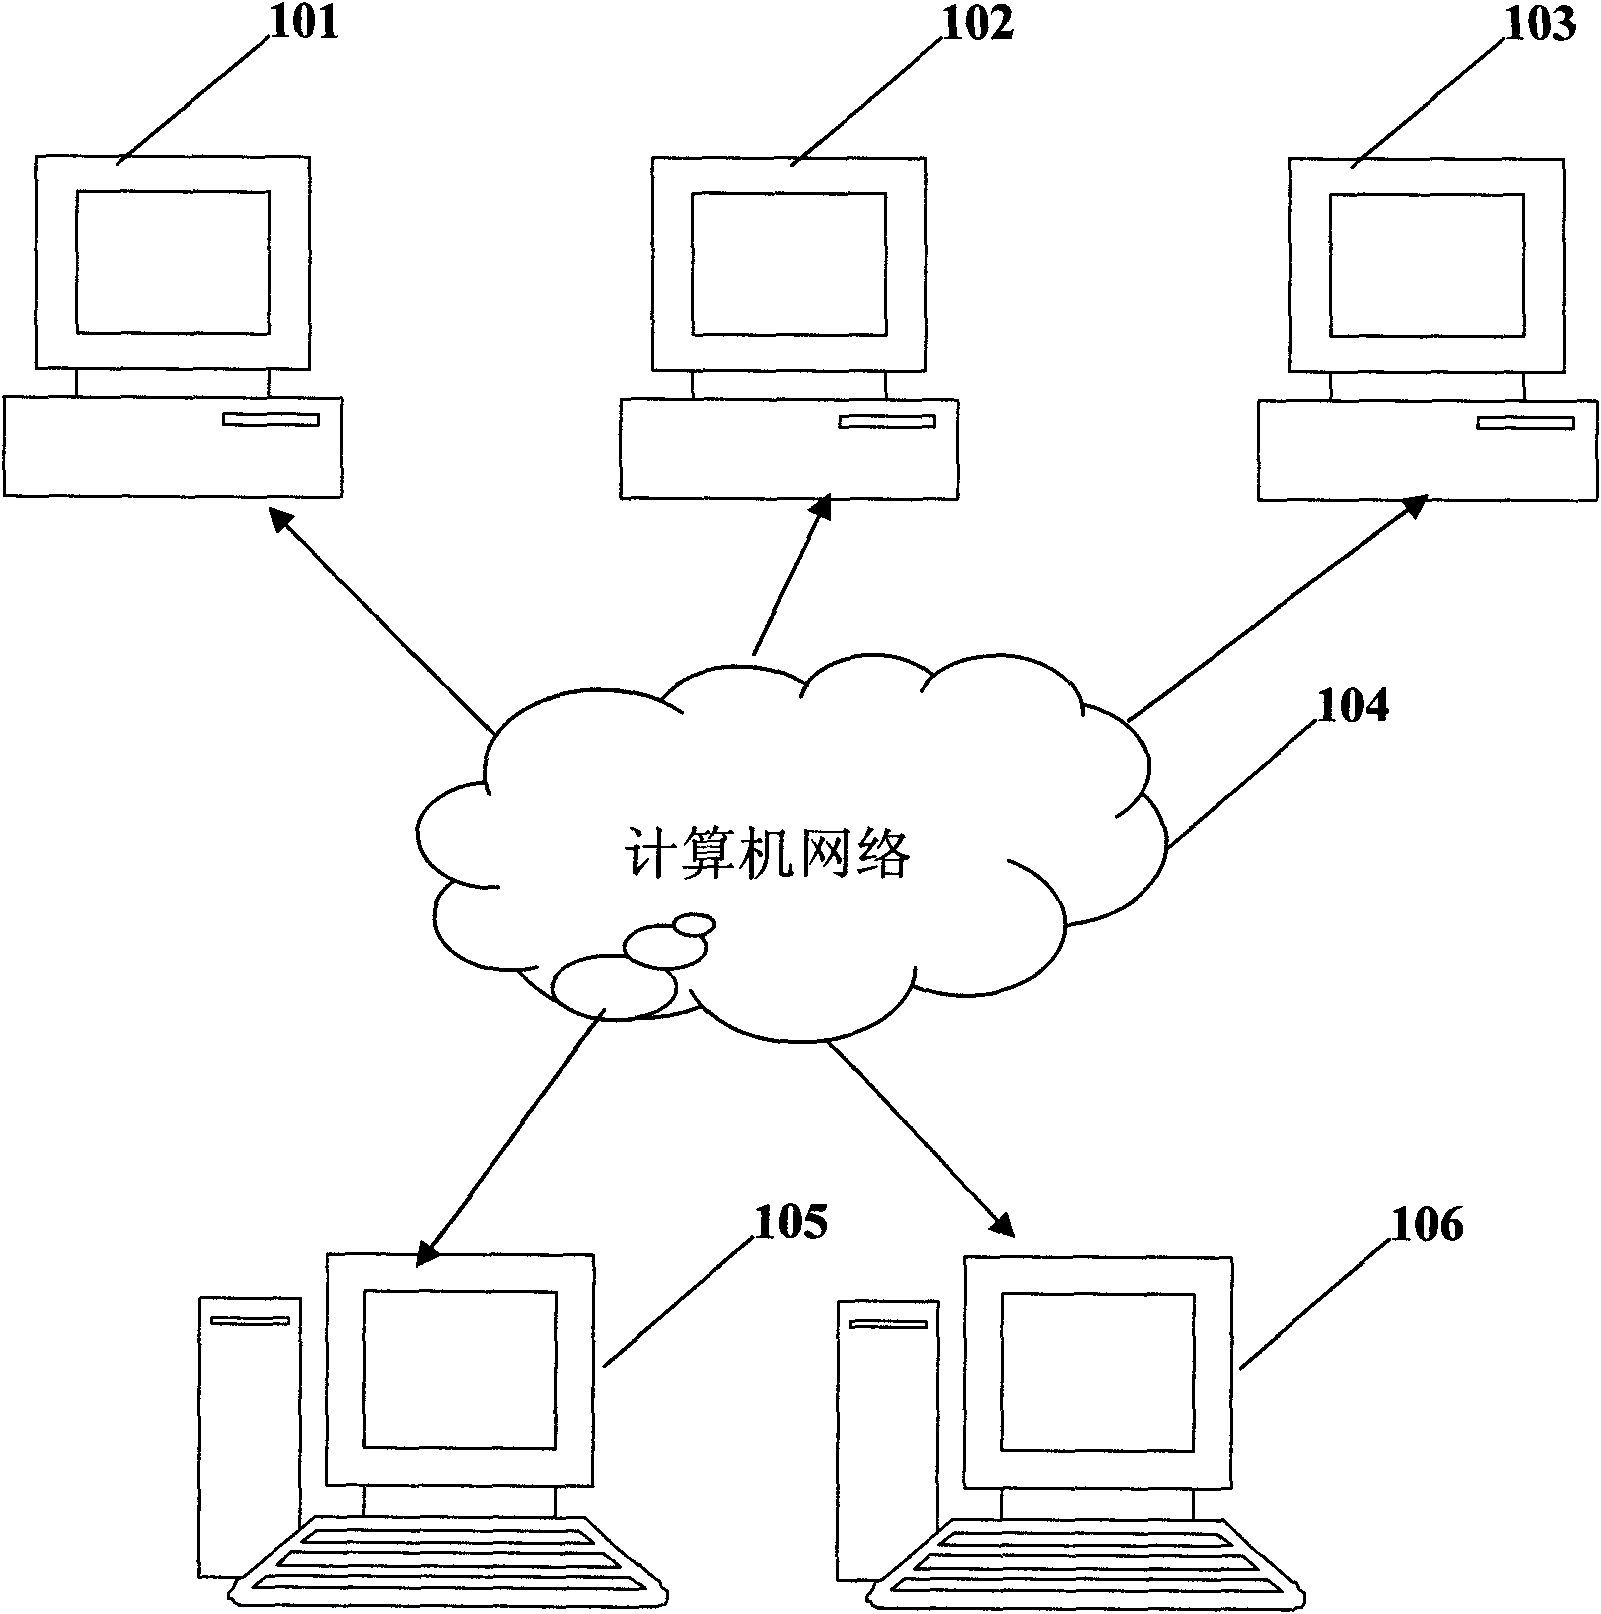 Remote service system and method based on instant messaging system